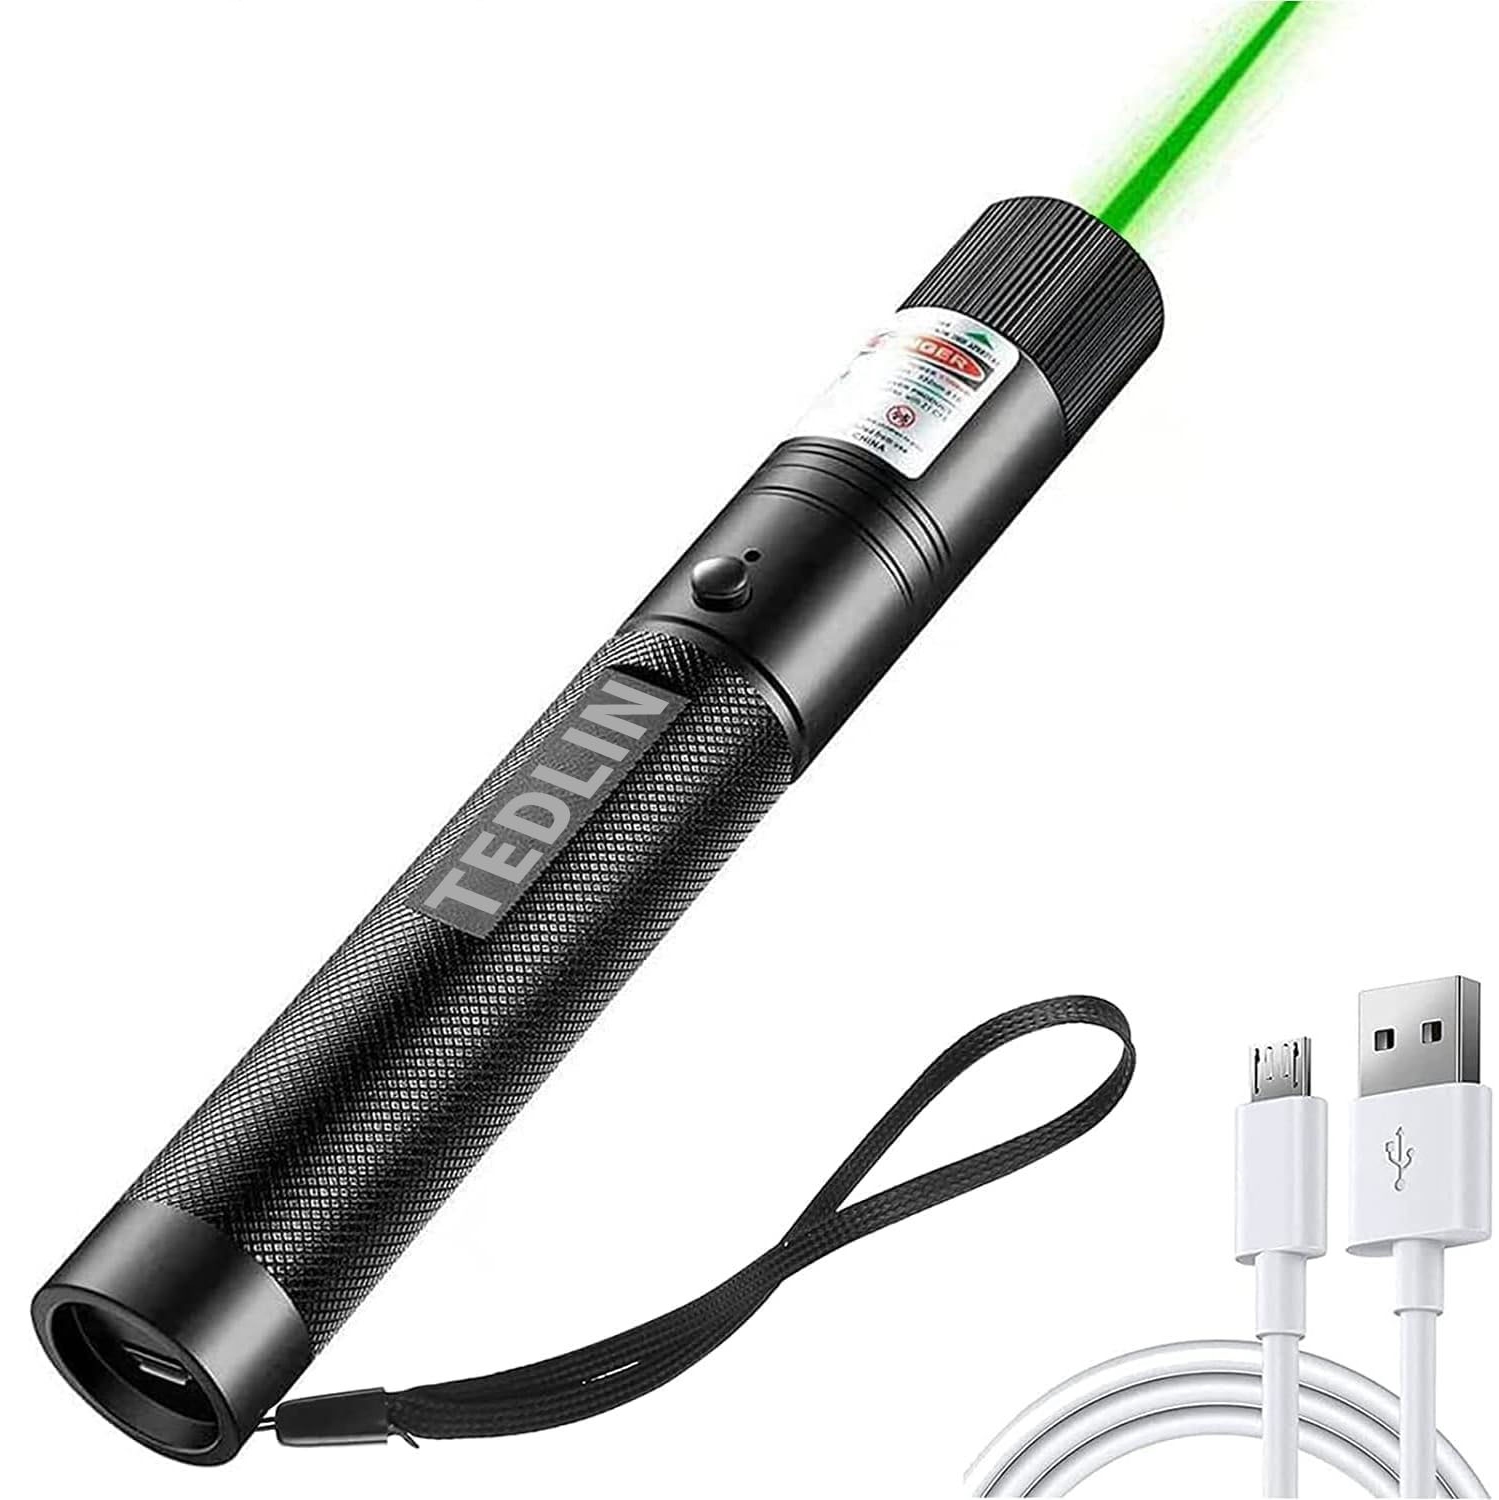 Laser Pointer USB Rechargeable High Power Long Range 10,000 ft Powerful Tactical Flashlight with Adjustable Focus Laser Pointer and Presentation and Game-FREE SHIPPING